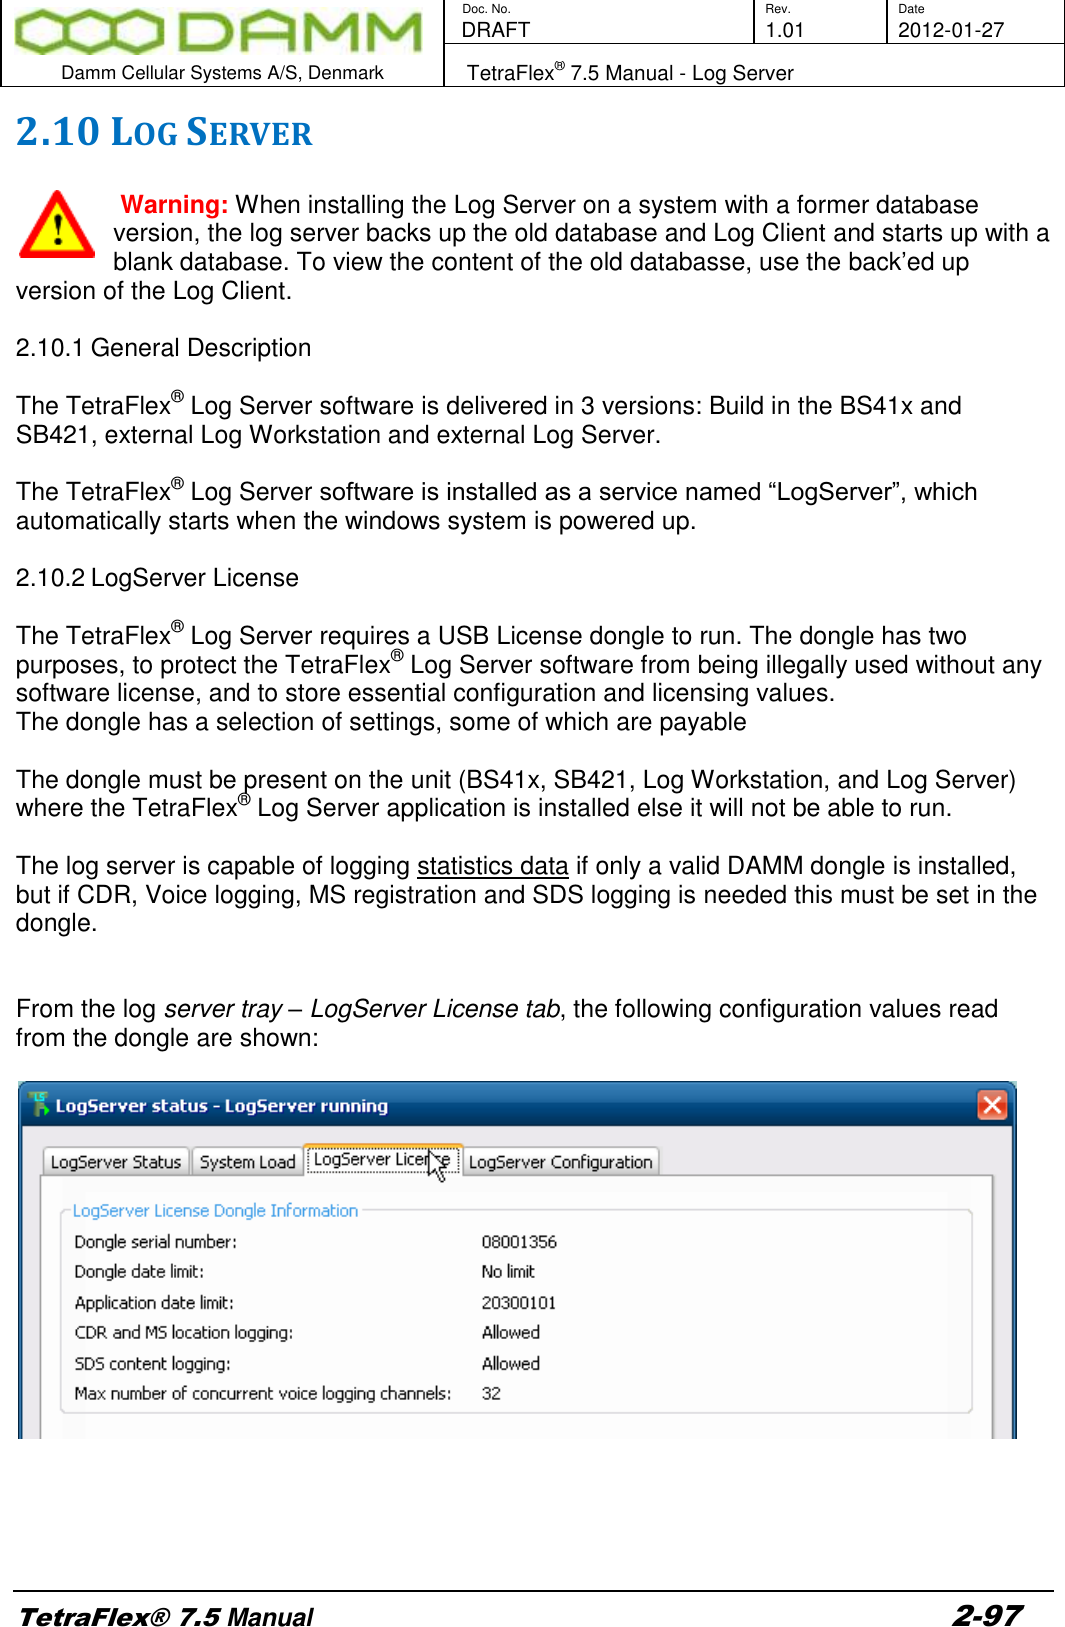        Doc. No. Rev. Date    DRAFT  1.01 2012-01-27  Damm Cellular Systems A/S, Denmark   TetraFlex® 7.5 Manual - Log Server  TetraFlex® 7.5 Manual 2-97 2.10 LOG SERVER    Warning: When installing the Log Server on a system with a former database version, the log server backs up the old database and Log Client and starts up with a blank database. To view the content of the old databasse, use the back’ed up version of the Log Client.  2.10.1 General Description  The TetraFlex® Log Server software is delivered in 3 versions: Build in the BS41x and SB421, external Log Workstation and external Log Server.   The TetraFlex® Log Server software is installed as a service named “LogServer”, which automatically starts when the windows system is powered up.   2.10.2 LogServer License  The TetraFlex® Log Server requires a USB License dongle to run. The dongle has two purposes, to protect the TetraFlex® Log Server software from being illegally used without any software license, and to store essential configuration and licensing values. The dongle has a selection of settings, some of which are payable  The dongle must be present on the unit (BS41x, SB421, Log Workstation, and Log Server) where the TetraFlex® Log Server application is installed else it will not be able to run.  The log server is capable of logging statistics data if only a valid DAMM dongle is installed, but if CDR, Voice logging, MS registration and SDS logging is needed this must be set in the dongle.   From the log server tray – LogServer License tab, the following configuration values read from the dongle are shown:        